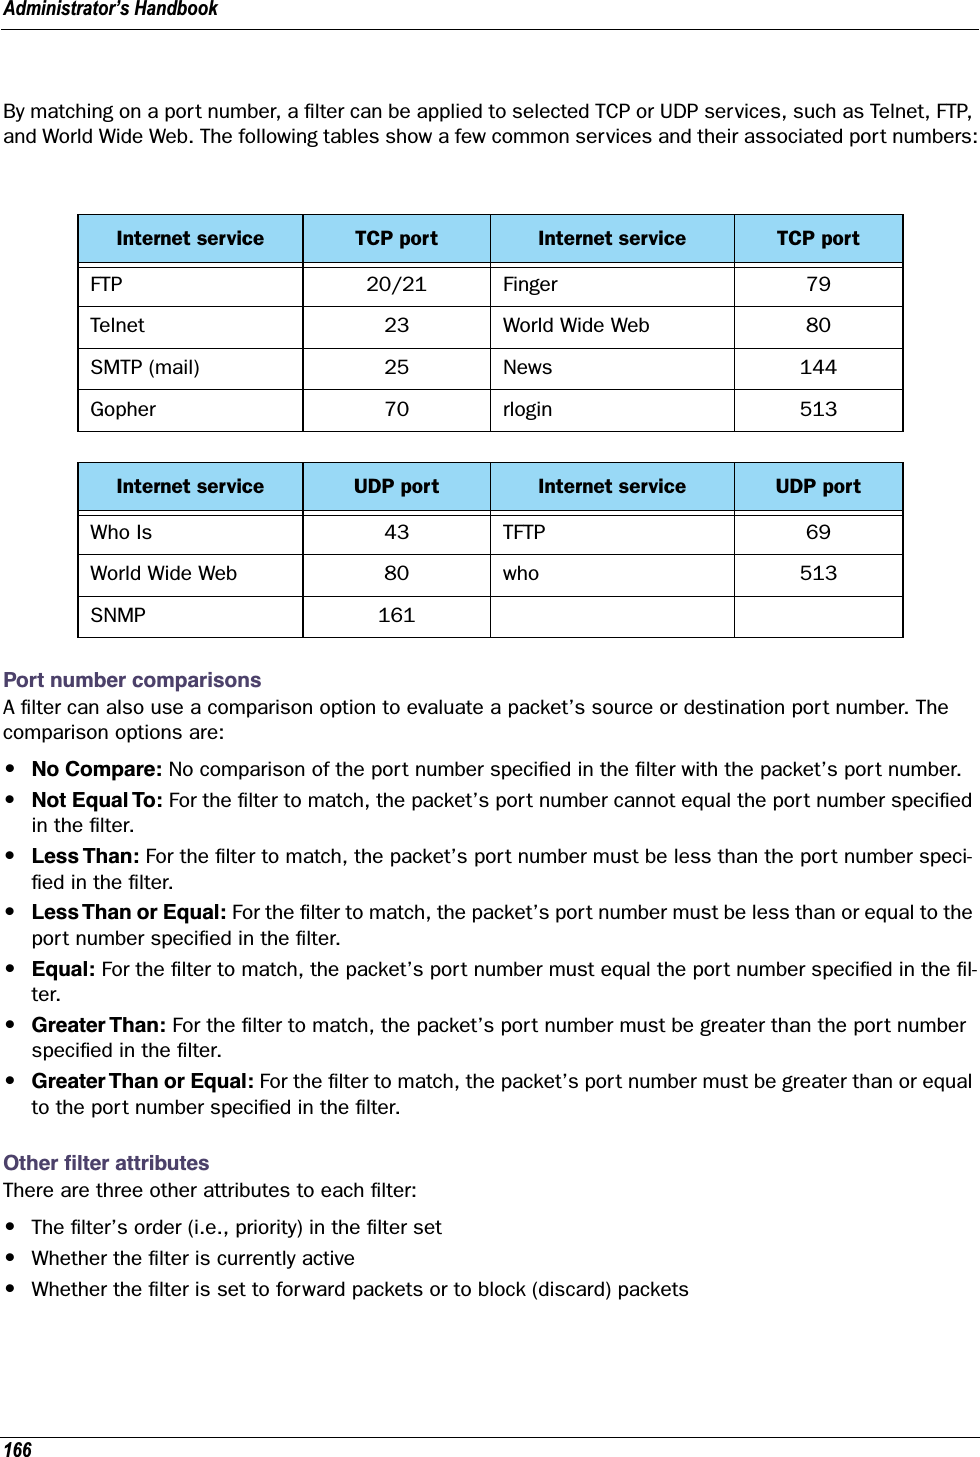  Administrator’s Handbook166 By matching on a port number, a ﬁlter can be applied to selected TCP or UDP services, such as Telnet, FTP, and World Wide Web. The following tables show a few common services and their associated port numbers: Port number comparisons A ﬁlter can also use a comparison option to evaluate a packet’s source or destination port number. The comparison options are: • No Compare:  No comparison of the port number speciﬁed in the ﬁlter with the packet’s port number. • Not Equal To:  For the ﬁlter to match, the packet’s port number cannot equal the port number speciﬁed in the ﬁlter. • Less Than:  For the ﬁlter to match, the packet’s port number must be less than the port number speci-ﬁed in the ﬁlter. • Less Than or Equal:  For the ﬁlter to match, the packet’s port number must be less than or equal to the port number speciﬁed in the ﬁlter. • Equal:   For the ﬁlter to match, the packet’s port number must equal the port number speciﬁed in the ﬁl-ter. • Greater Than:  For the ﬁlter to match, the packet’s port number must be greater than the port number speciﬁed in the ﬁlter. • Greater Than or Equal:  For the ﬁlter to match, the packet’s port number must be greater than or equal to the port number speciﬁed in the ﬁlter.Other ﬁlter attributesThere are three other attributes to each ﬁlter:•The ﬁlter’s order (i.e., priority) in the ﬁlter set•Whether the ﬁlter is currently active•Whether the ﬁlter is set to forward packets or to block (discard) packetsInternet service TCP port Internet service TCP portFTP 20/21 Finger 79Telnet 23 World Wide Web 80SMTP (mail) 25 News 144Gopher 70 rlogin 513Internet service UDP port Internet service UDP portWho Is 43 TFTP 69World Wide Web 80 who 513SNMP 161